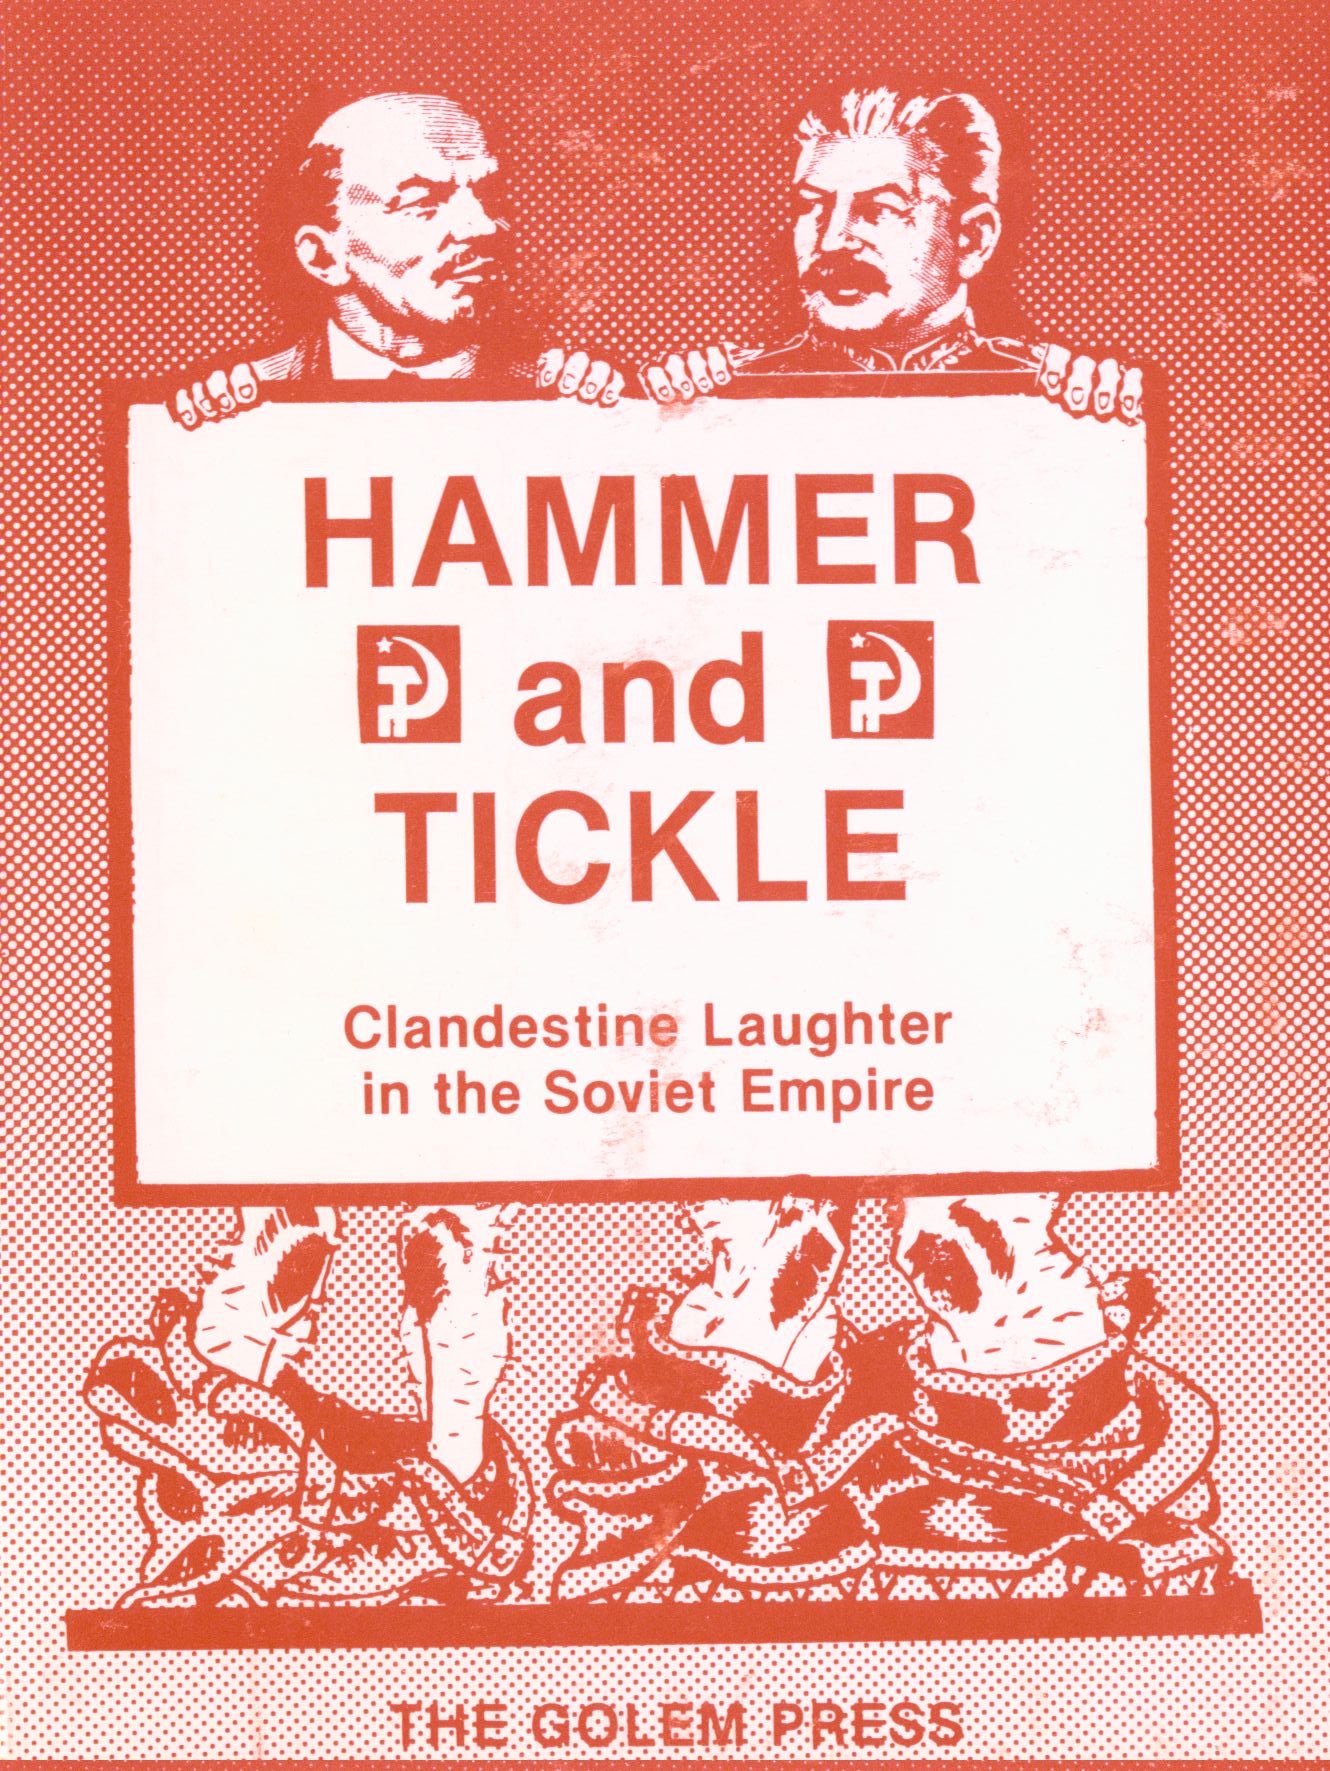 Hammer and Tickle